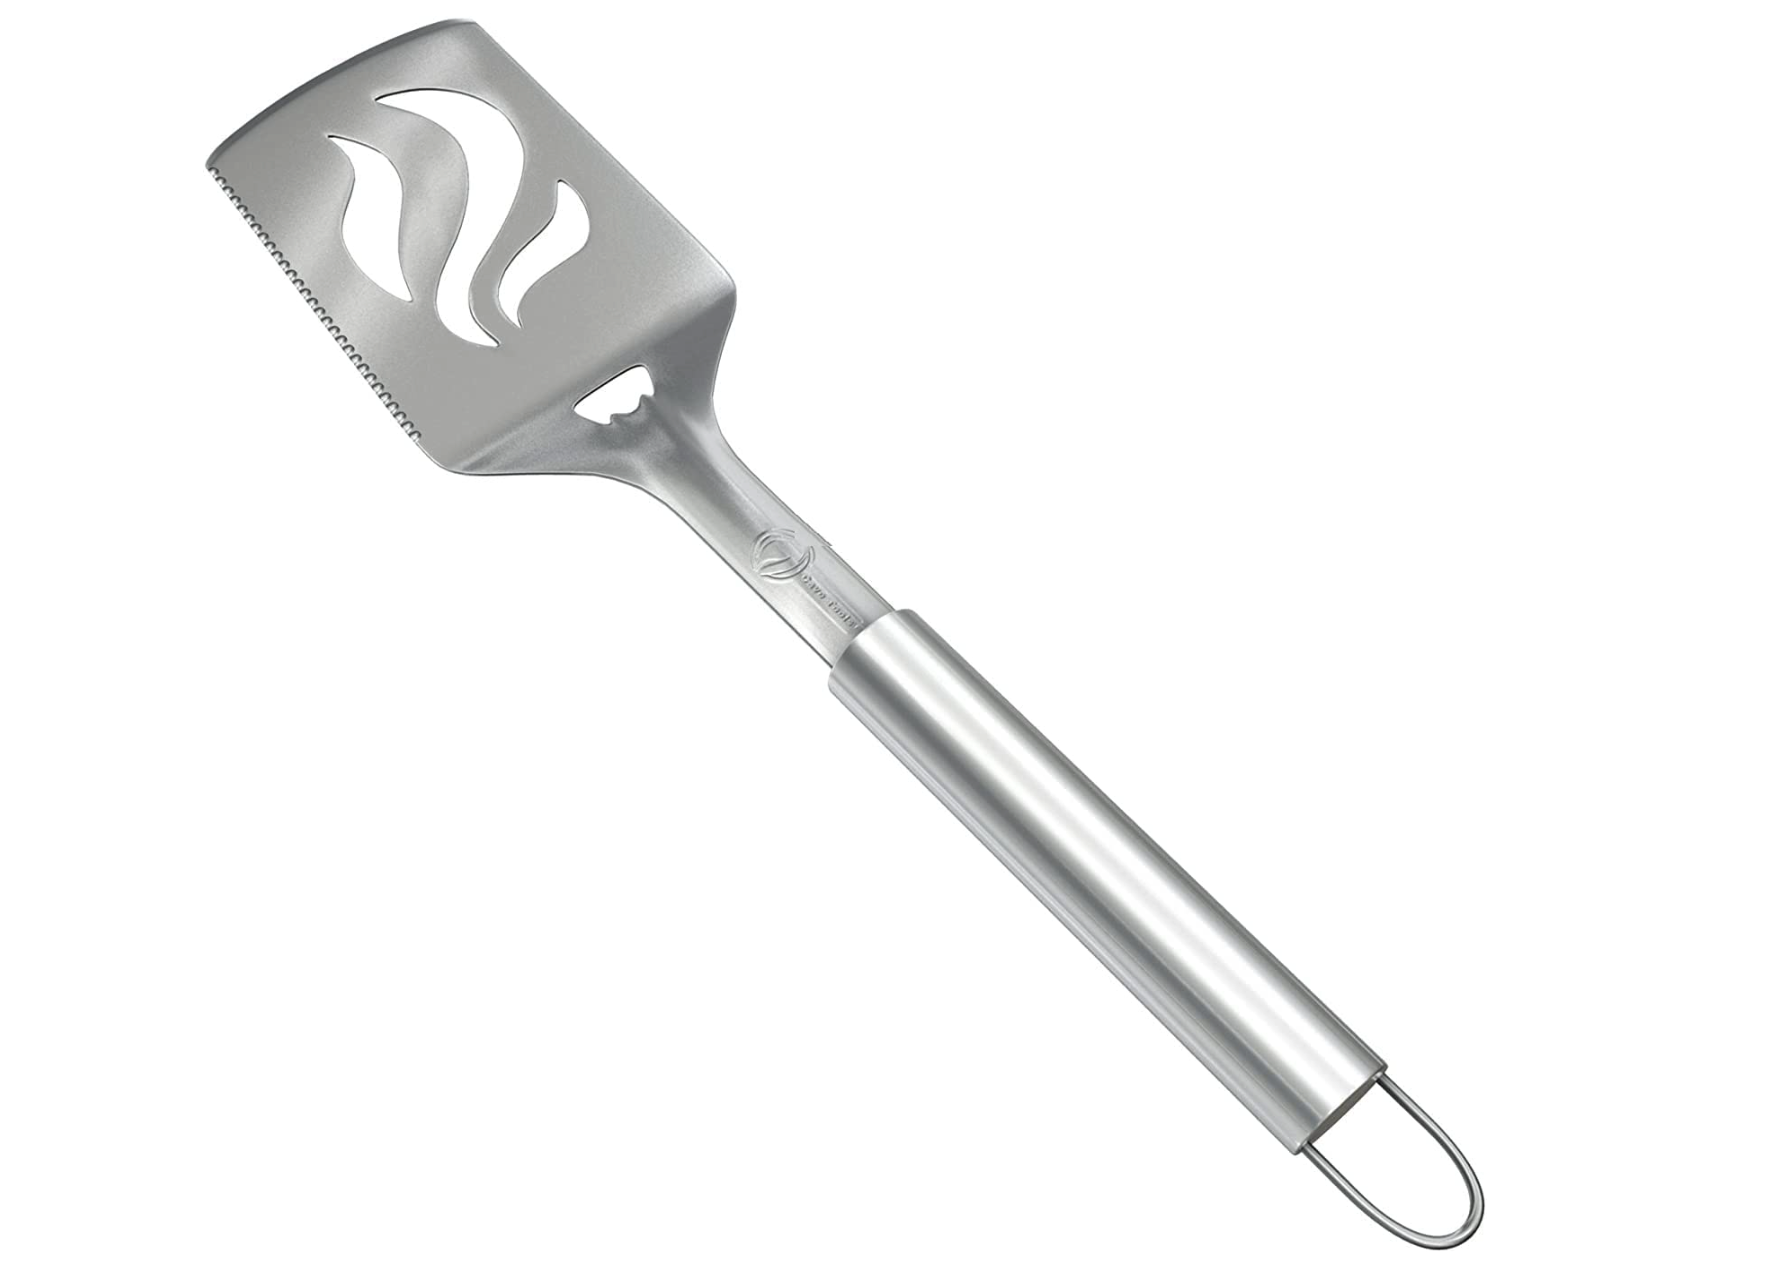 The Cave Tools Barbecue Spatula sold on Amazon